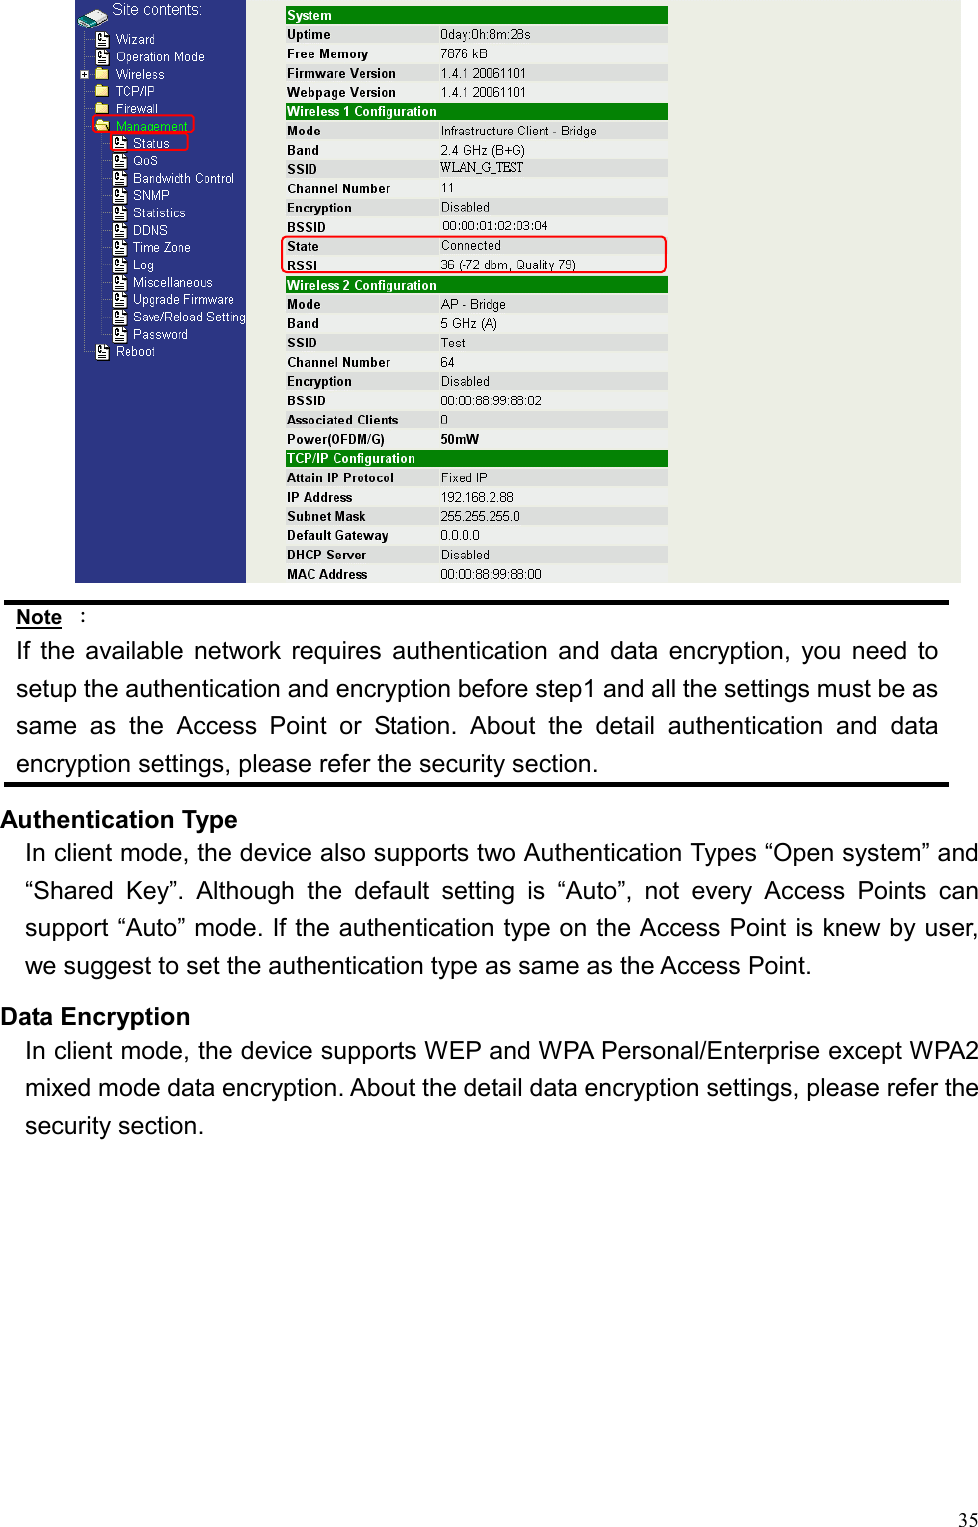  35 Note ： If the available network requires authentication and data encryption, you need to setup the authentication and encryption before step1 and all the settings must be as same as the Access Point or Station. About the detail authentication and data encryption settings, please refer the security section.   Authentication Type In client mode, the device also supports two Authentication Types “Open system” and “Shared Key”. Although the default setting is “Auto”, not every Access Points can support “Auto” mode. If the authentication type on the Access Point is knew by user, we suggest to set the authentication type as same as the Access Point. Data Encryption In client mode, the device supports WEP and WPA Personal/Enterprise except WPA2 mixed mode data encryption. About the detail data encryption settings, please refer the security section.   